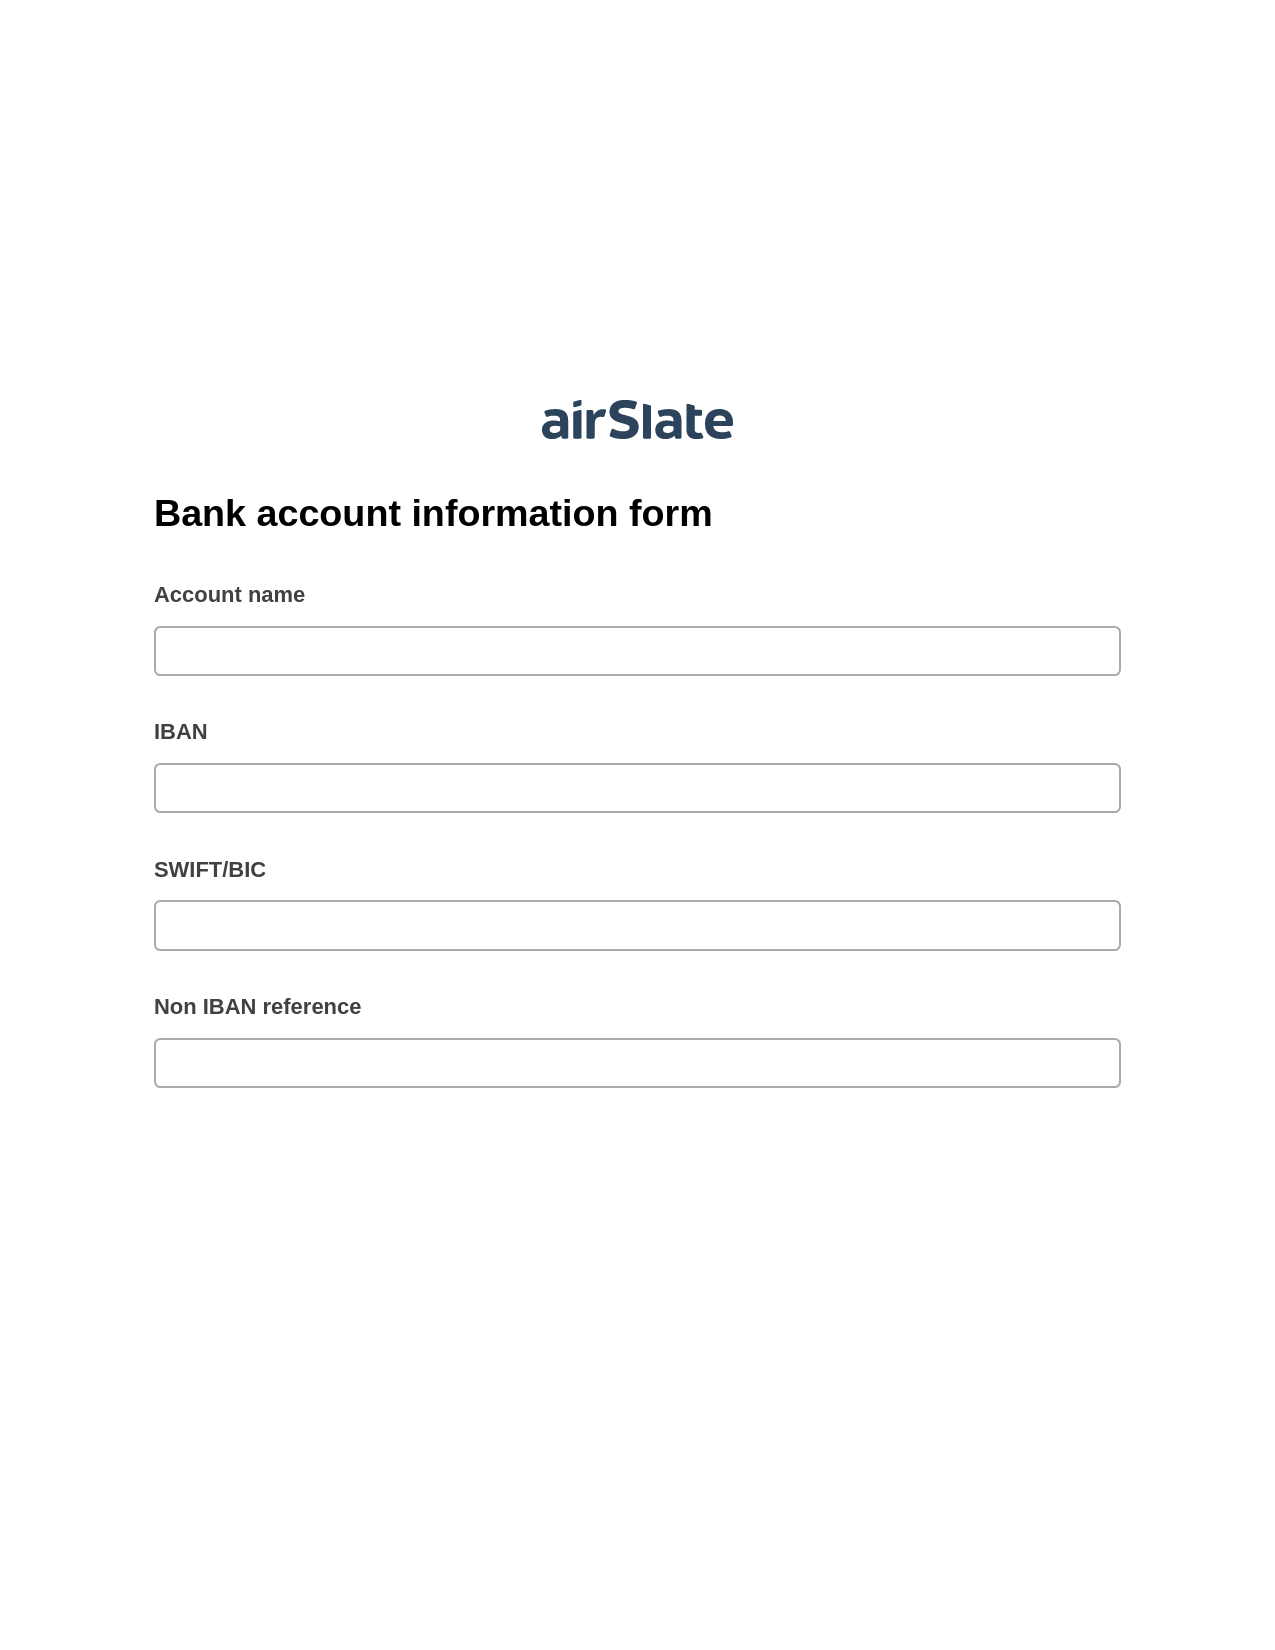 Bank account information form Pre-fill from Excel Spreadsheet Dropdown Options Bot, Mailchimp add recipient to audience Bot, Export to Google Sheet Bot